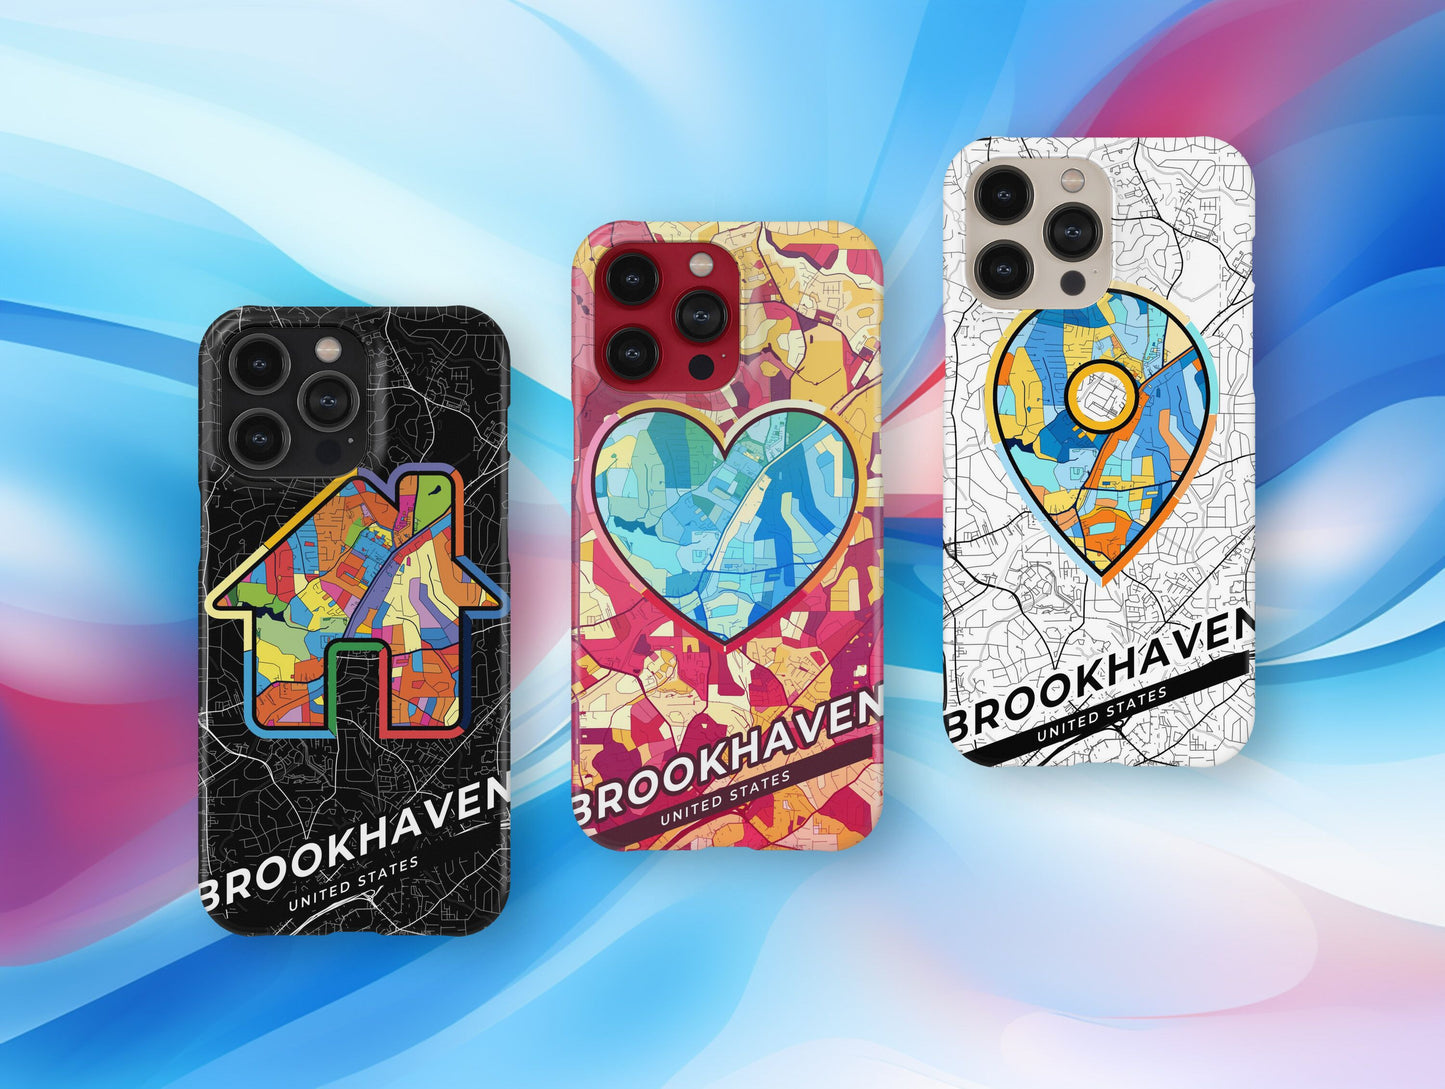 Brookhaven Georgia slim phone case with colorful icon. Birthday, wedding or housewarming gift. Couple match cases.